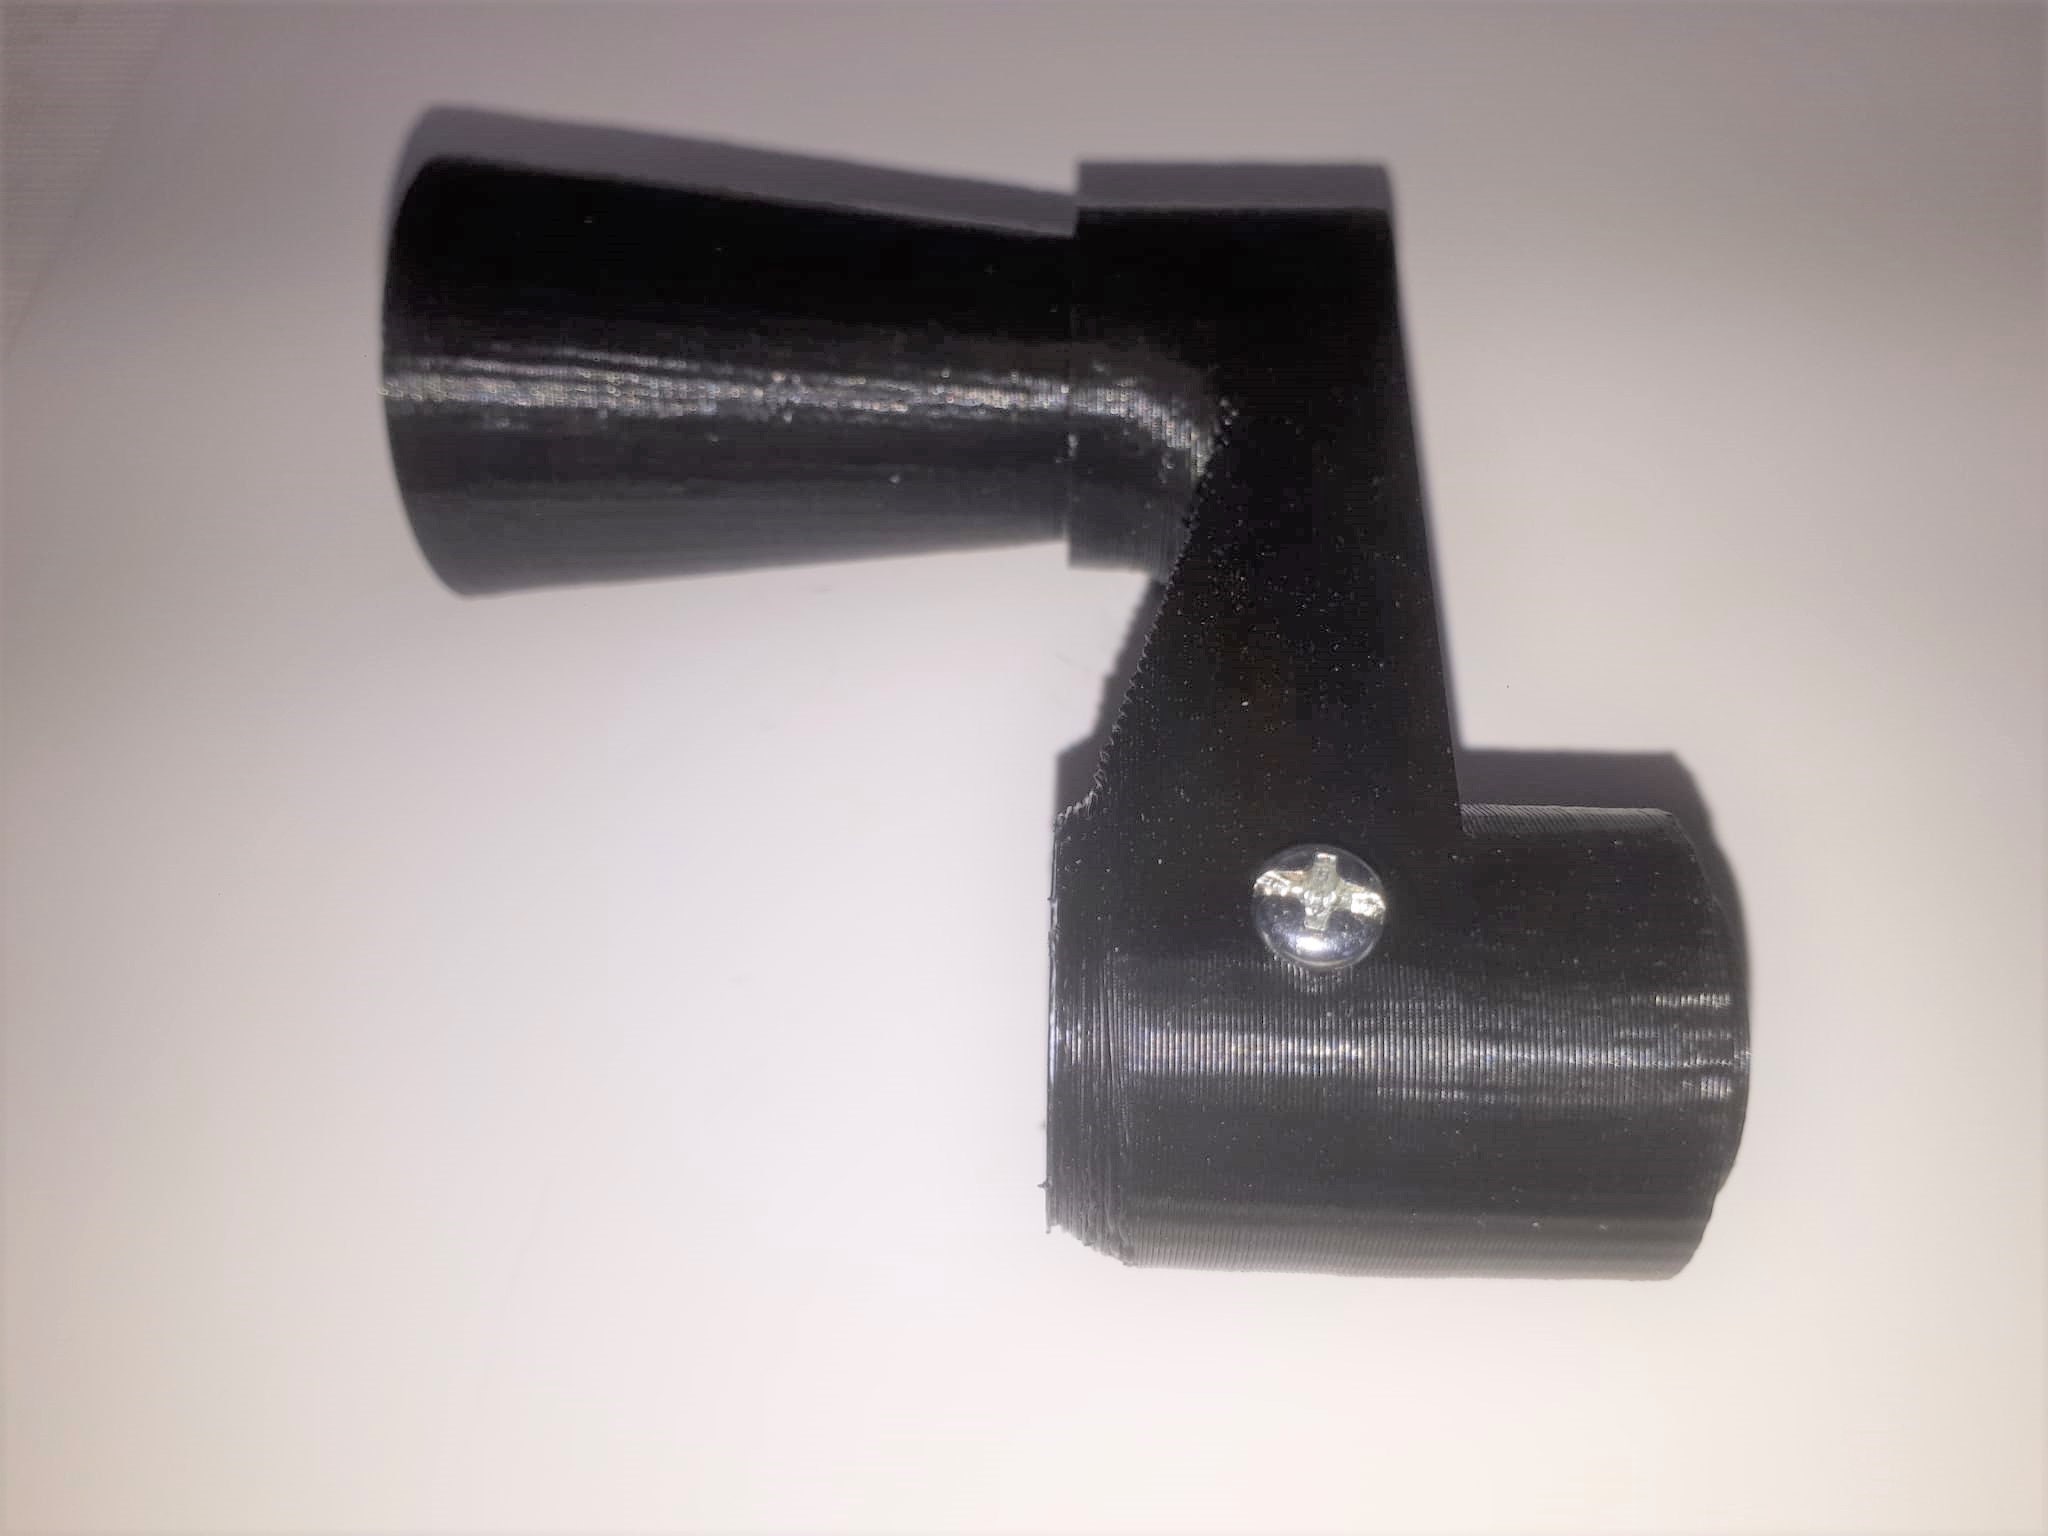 screws - Stronger attachment method for B&D Workmate top - Woodworking  Stack Exchange